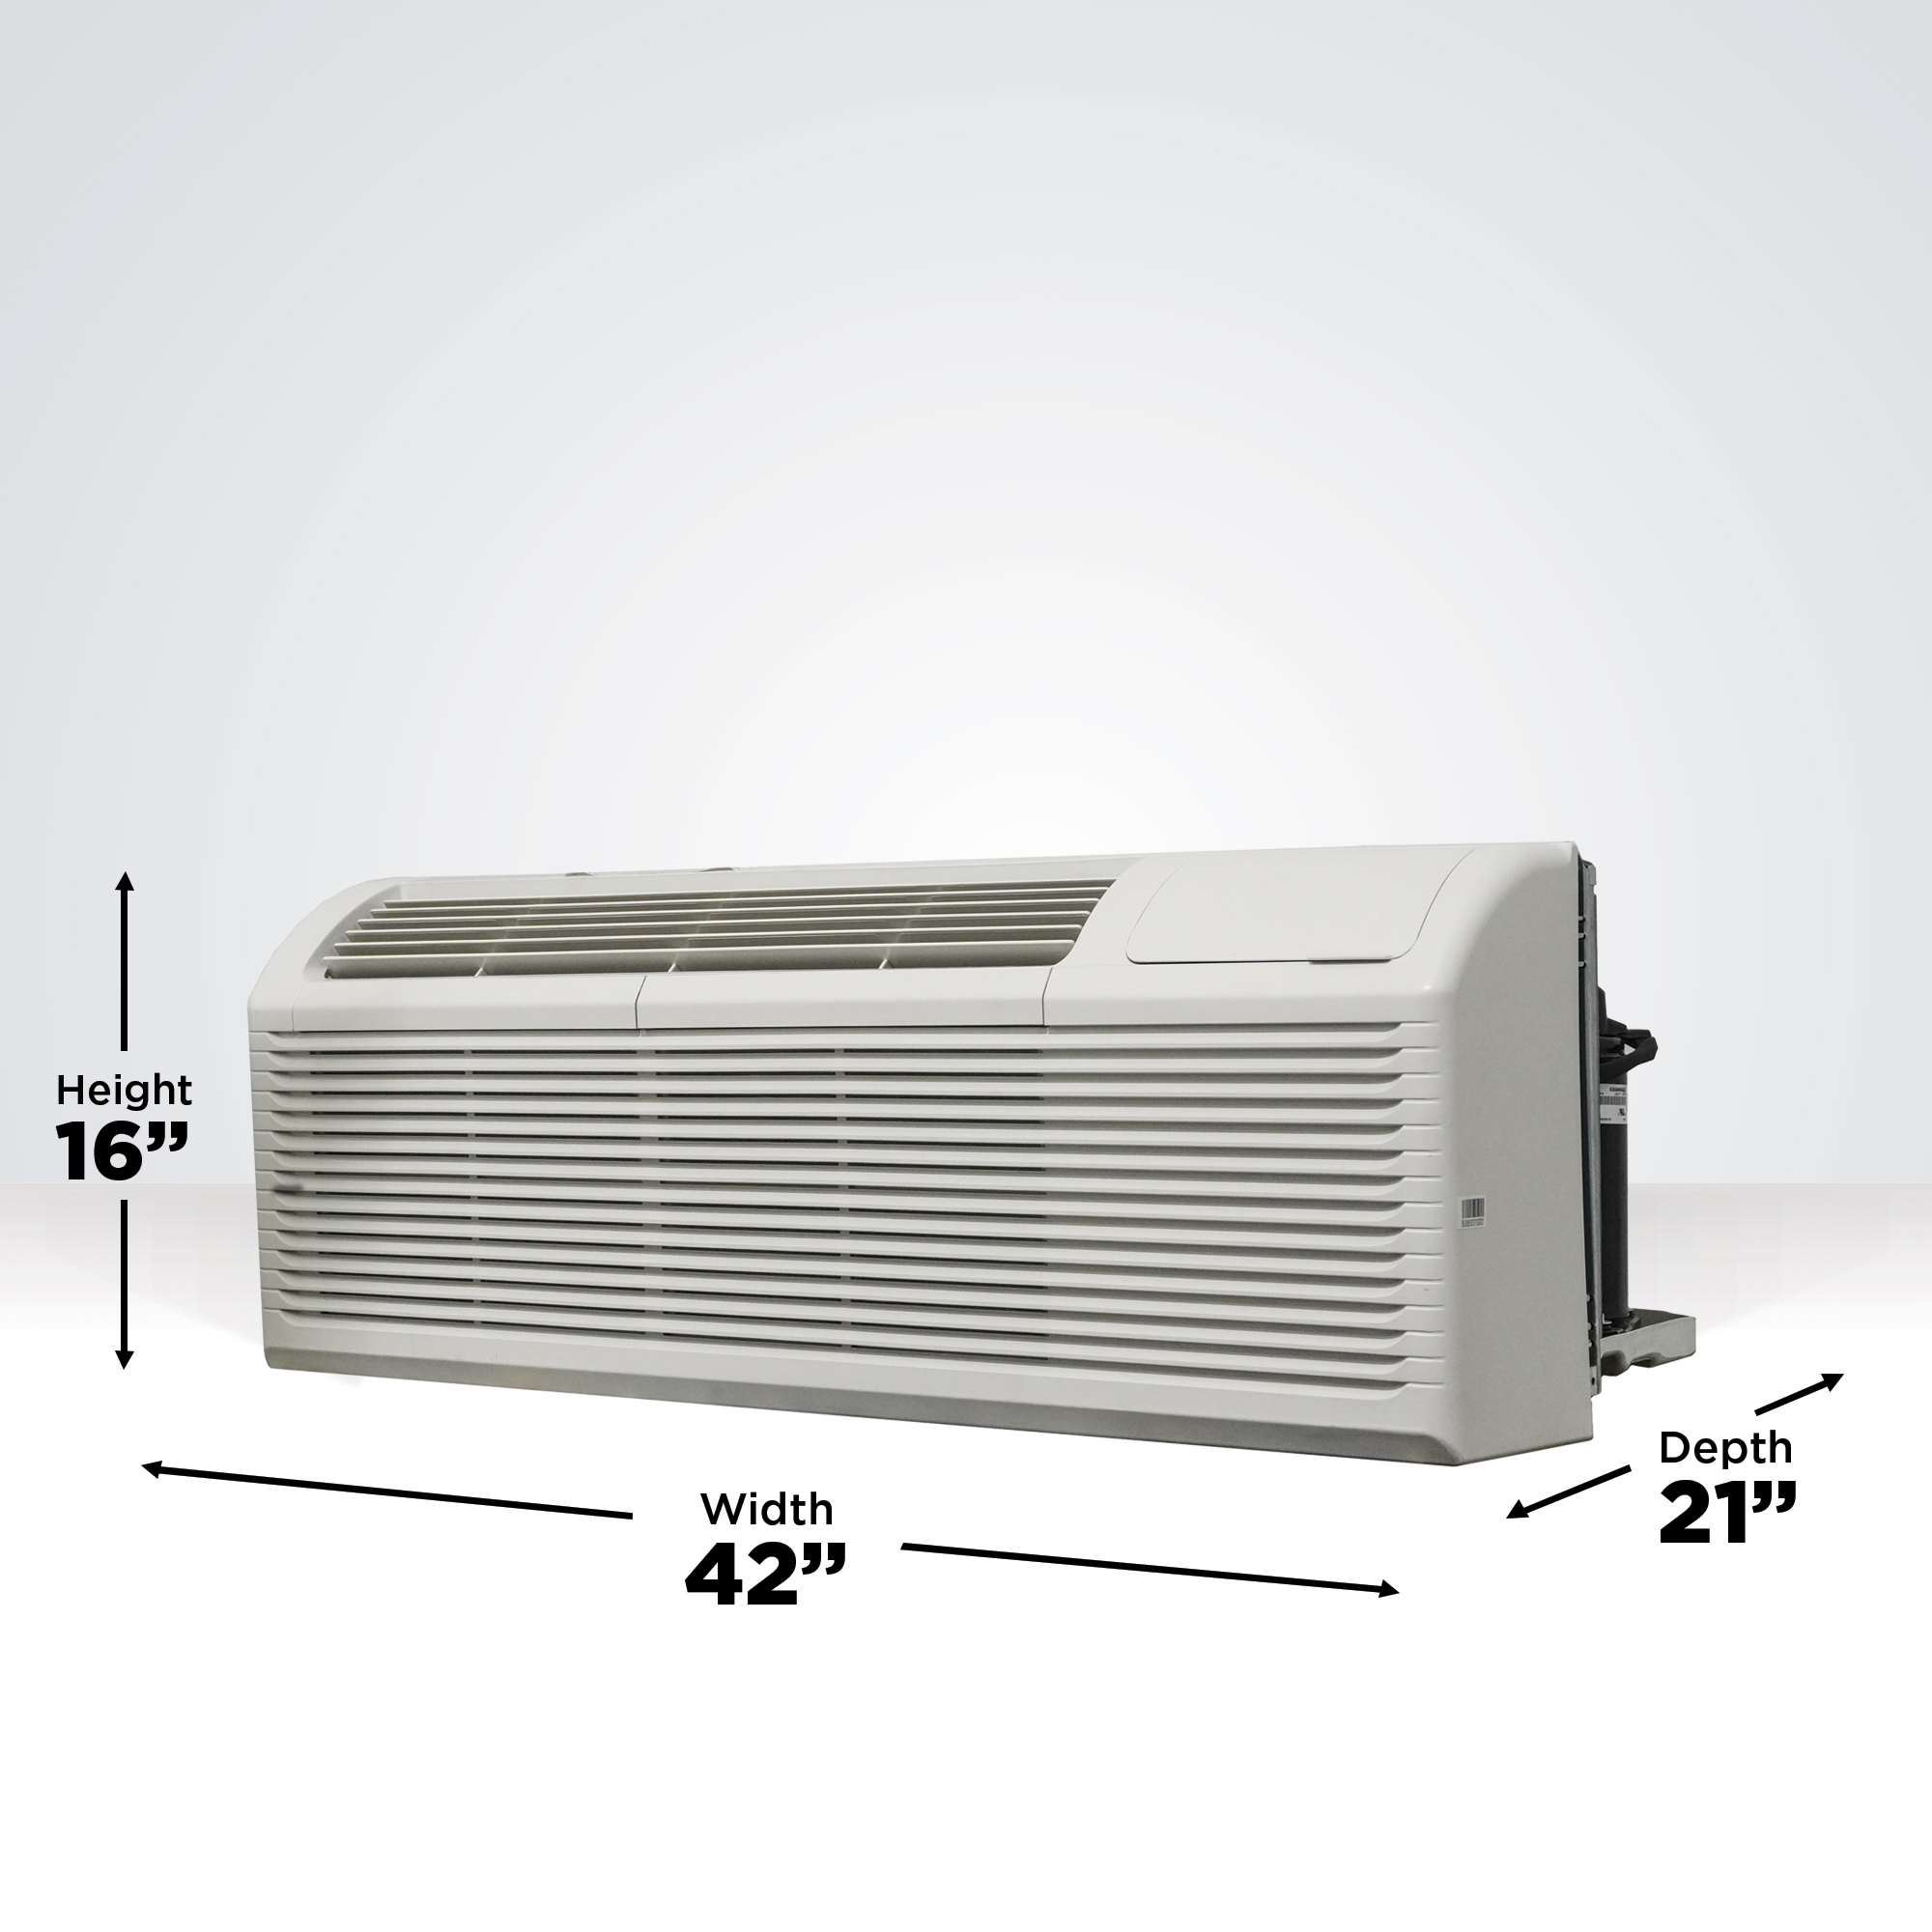 Danby 9,000 BTU Packaged Terminal Air Conditioner with Heat Pump